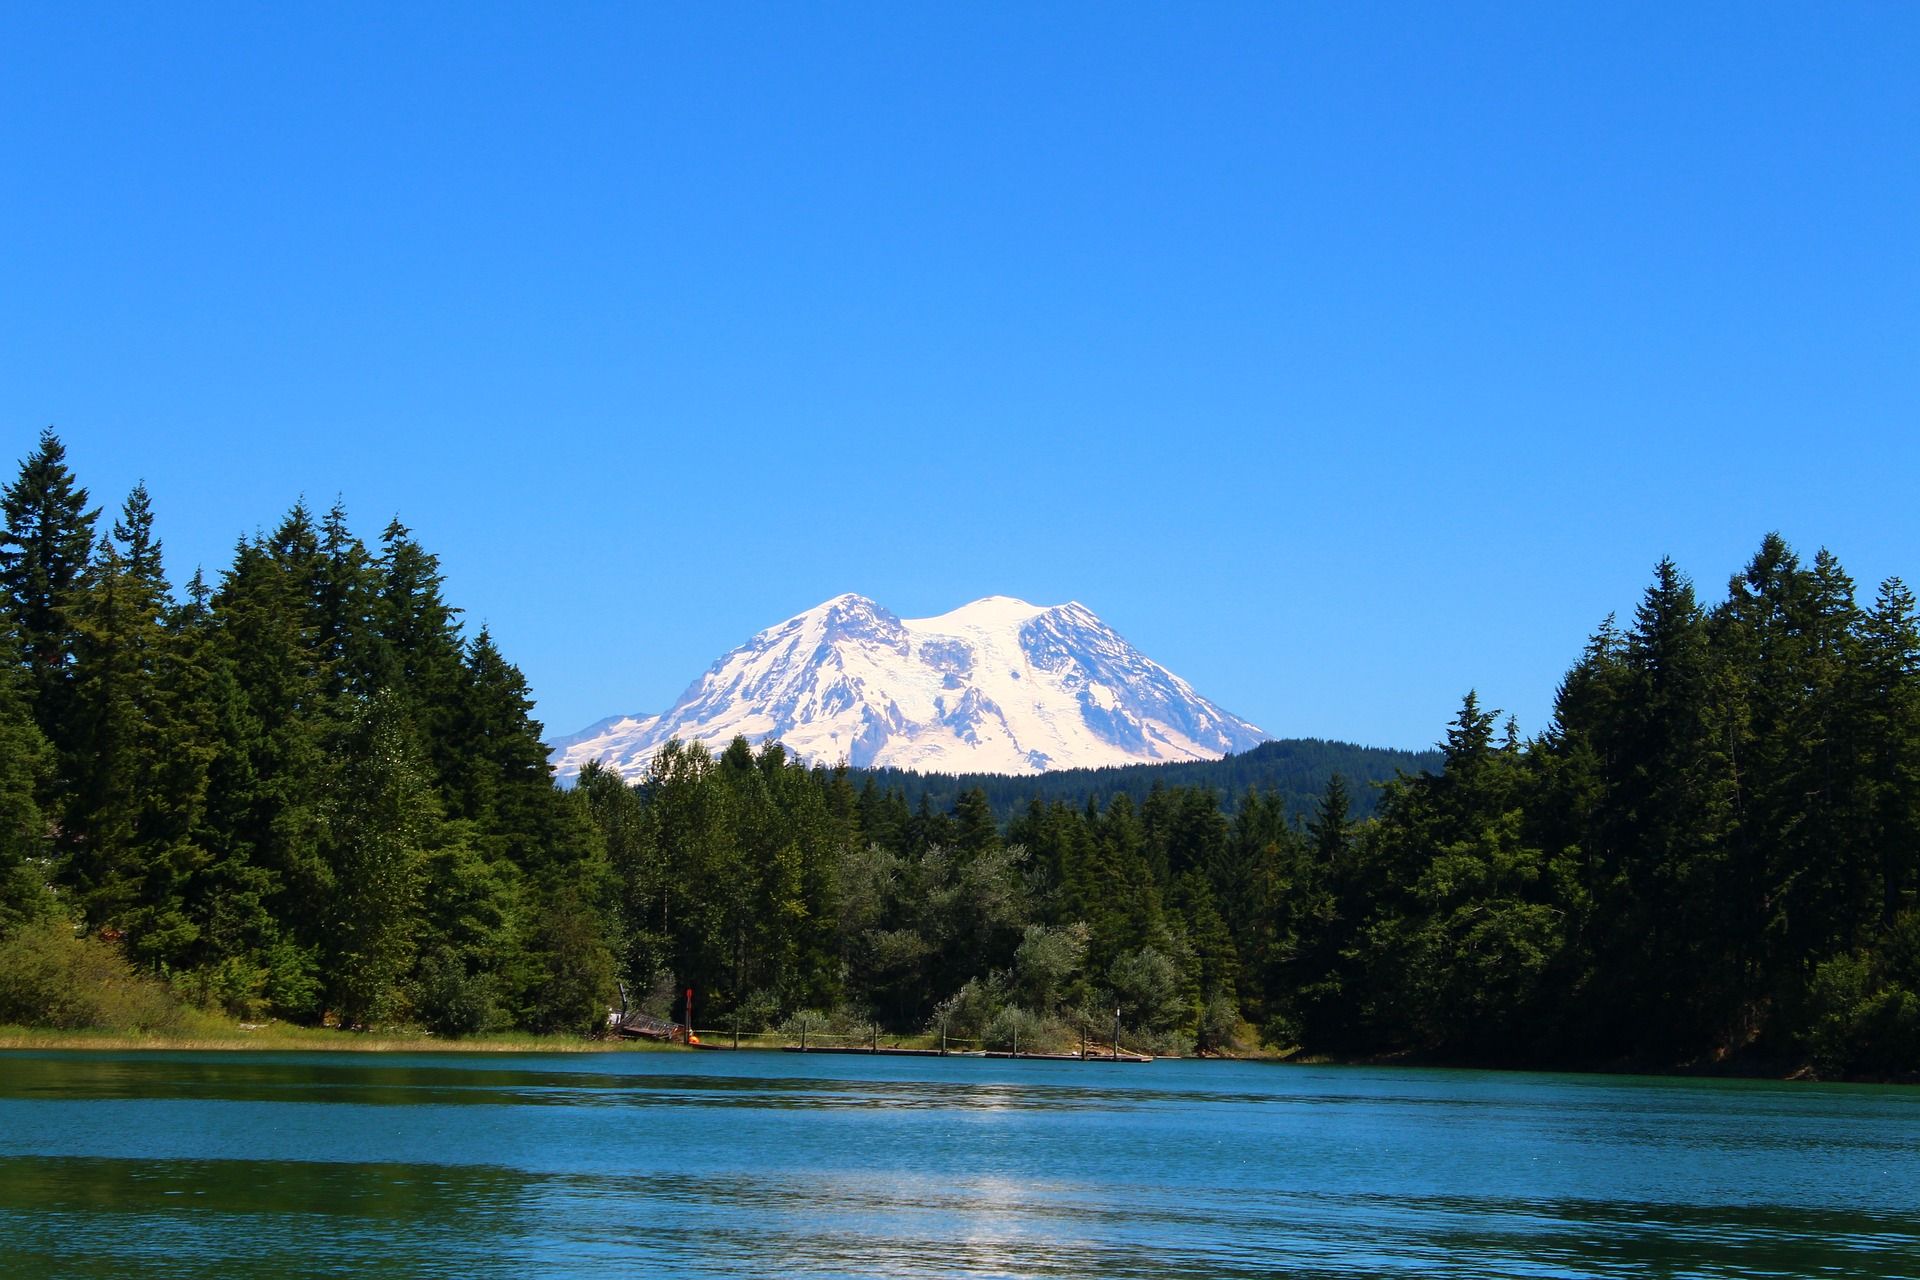 A view of Mount Rainier in Washington from a lake surrounded by trees